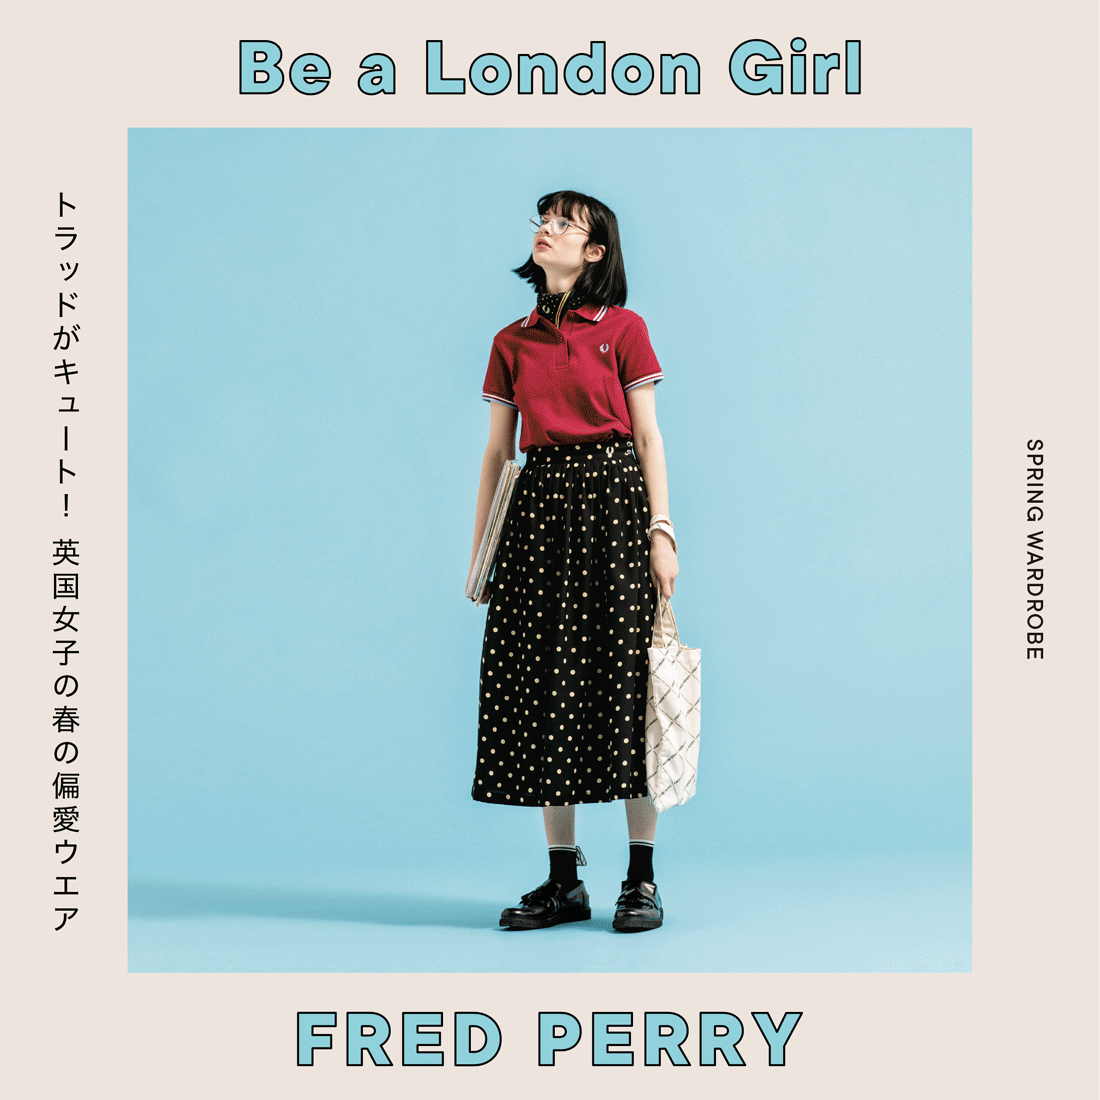 Be a London Girl FREAD PERRY